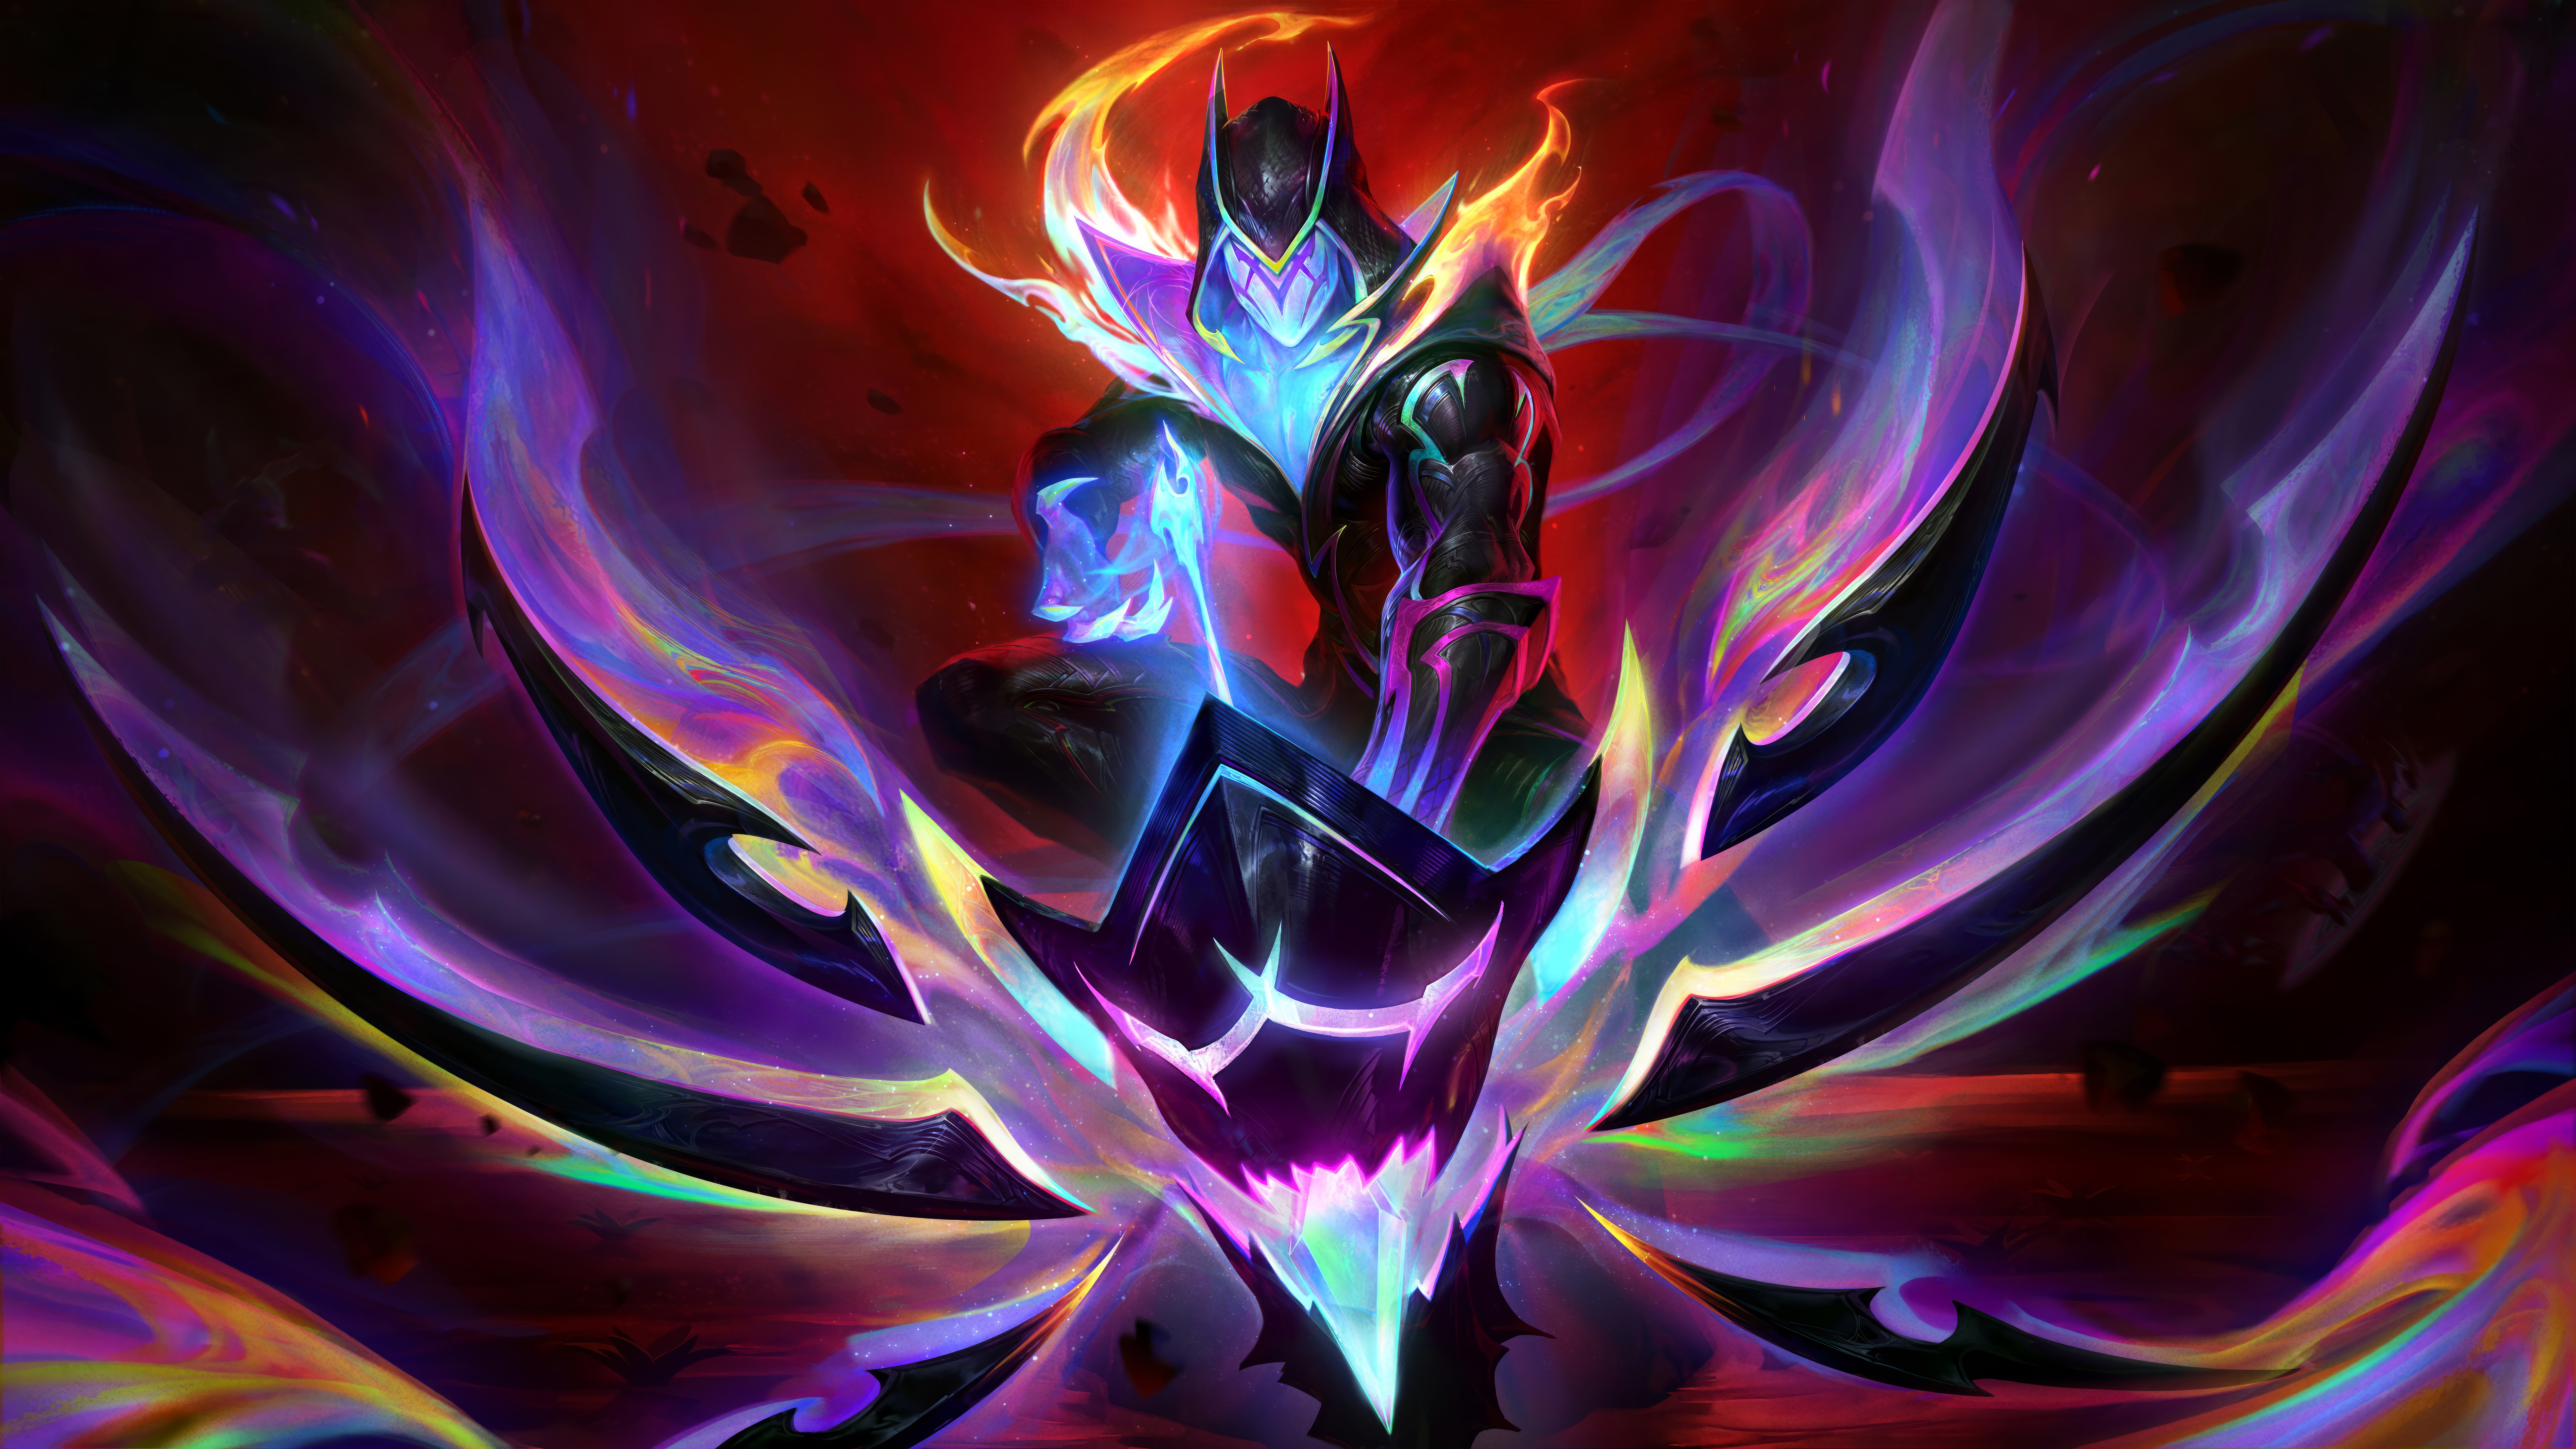 General 7680x4320 Empyrean (League of Legends) Varus (League of Legends) video games GZG Riot Games digital art League of Legends colorful video game art creature video game men face mask 4K video game characters claws muscles hoods